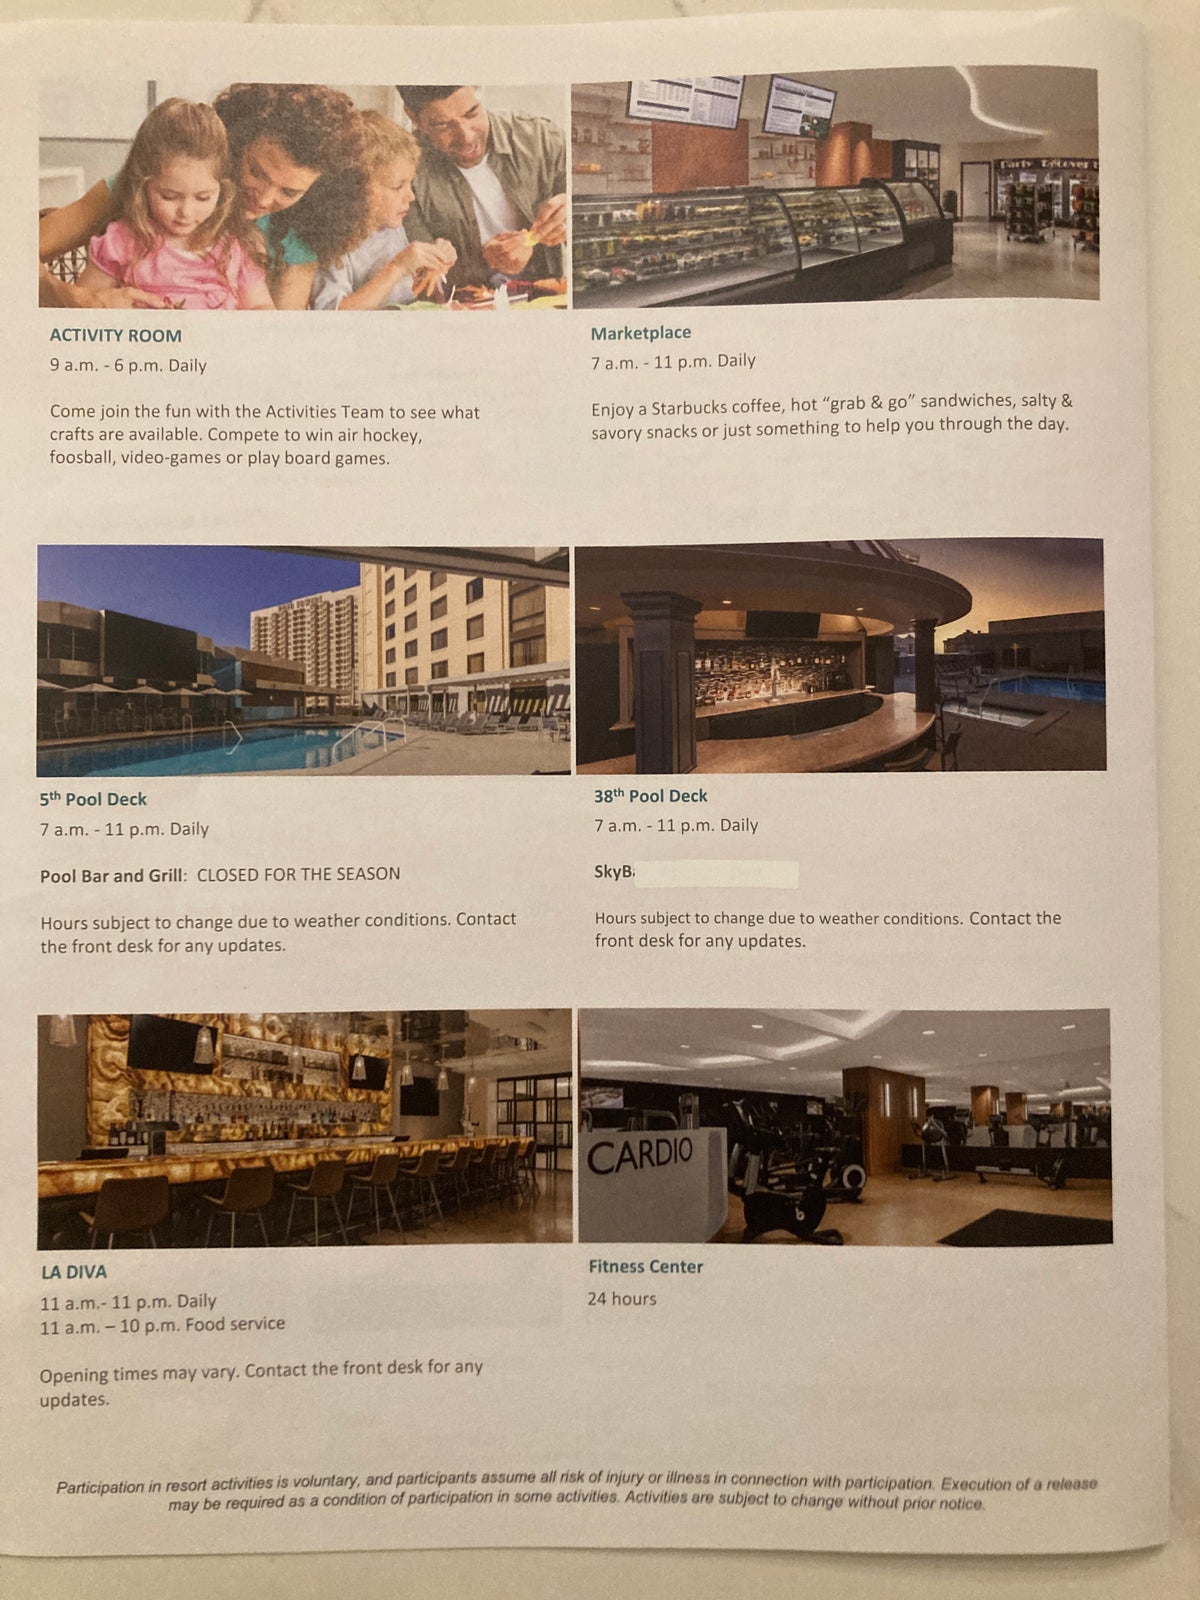 Marriotts Grand Chateau Las Vegas welcome packet facility hours